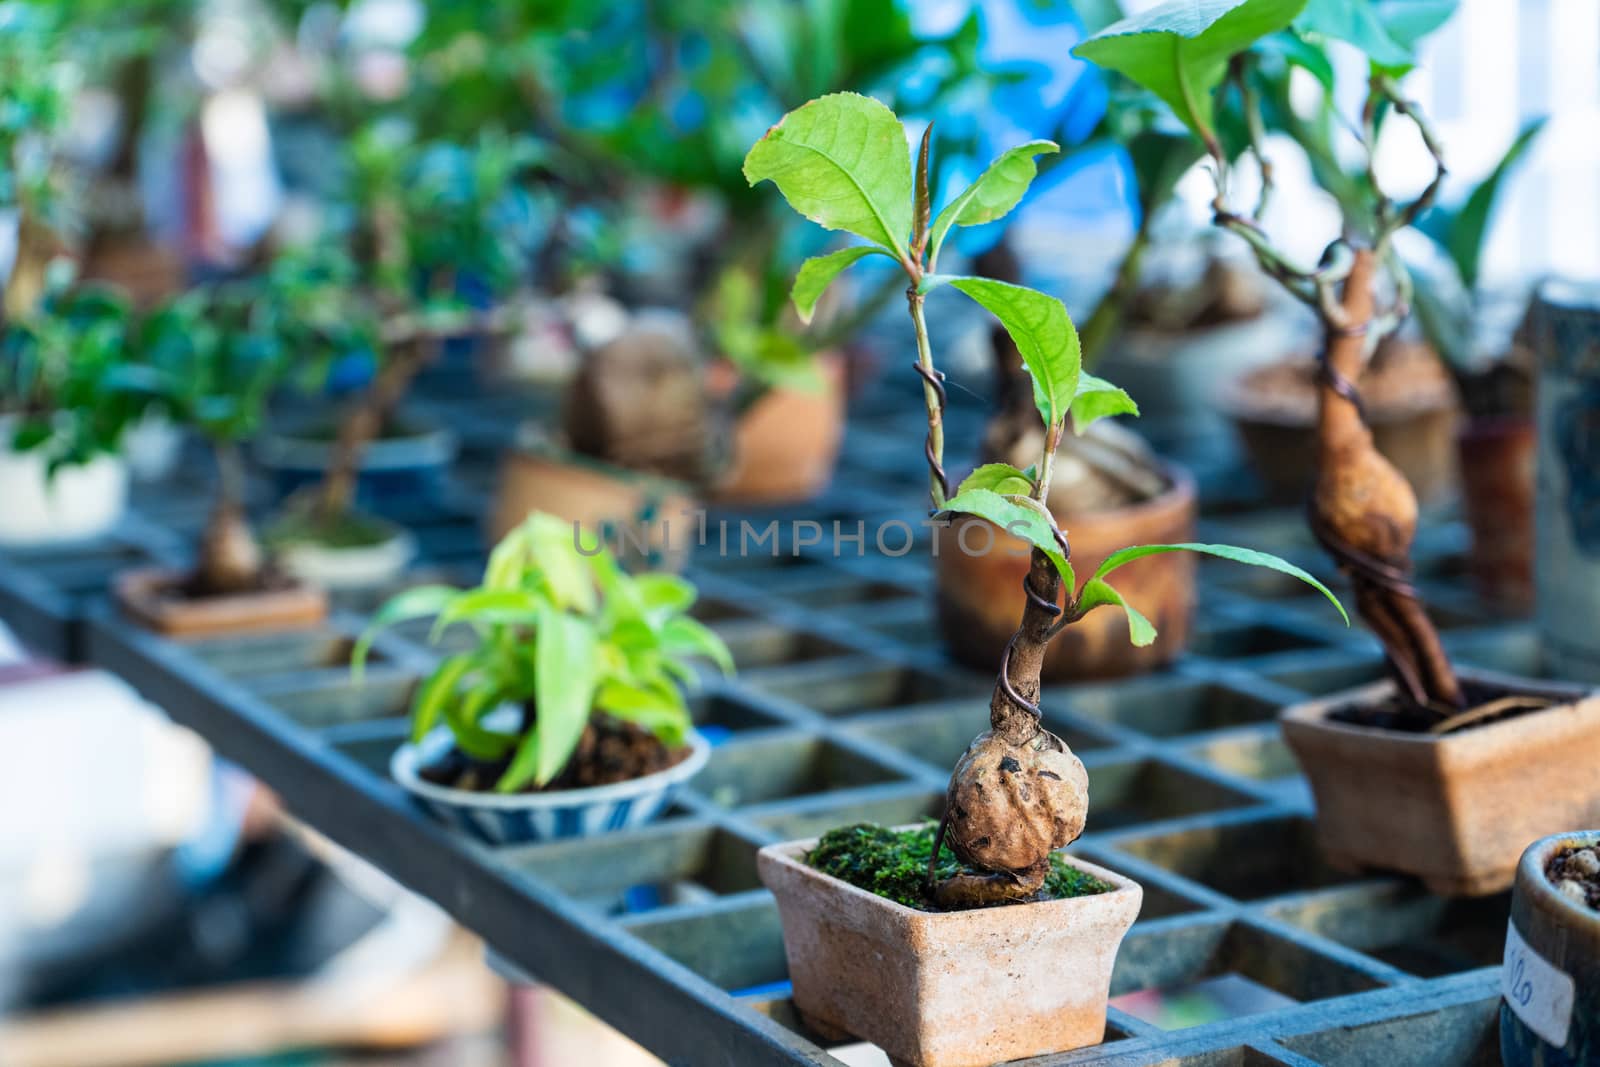 Decorative plants for decorating a room in a street market in Asia by Try_my_best